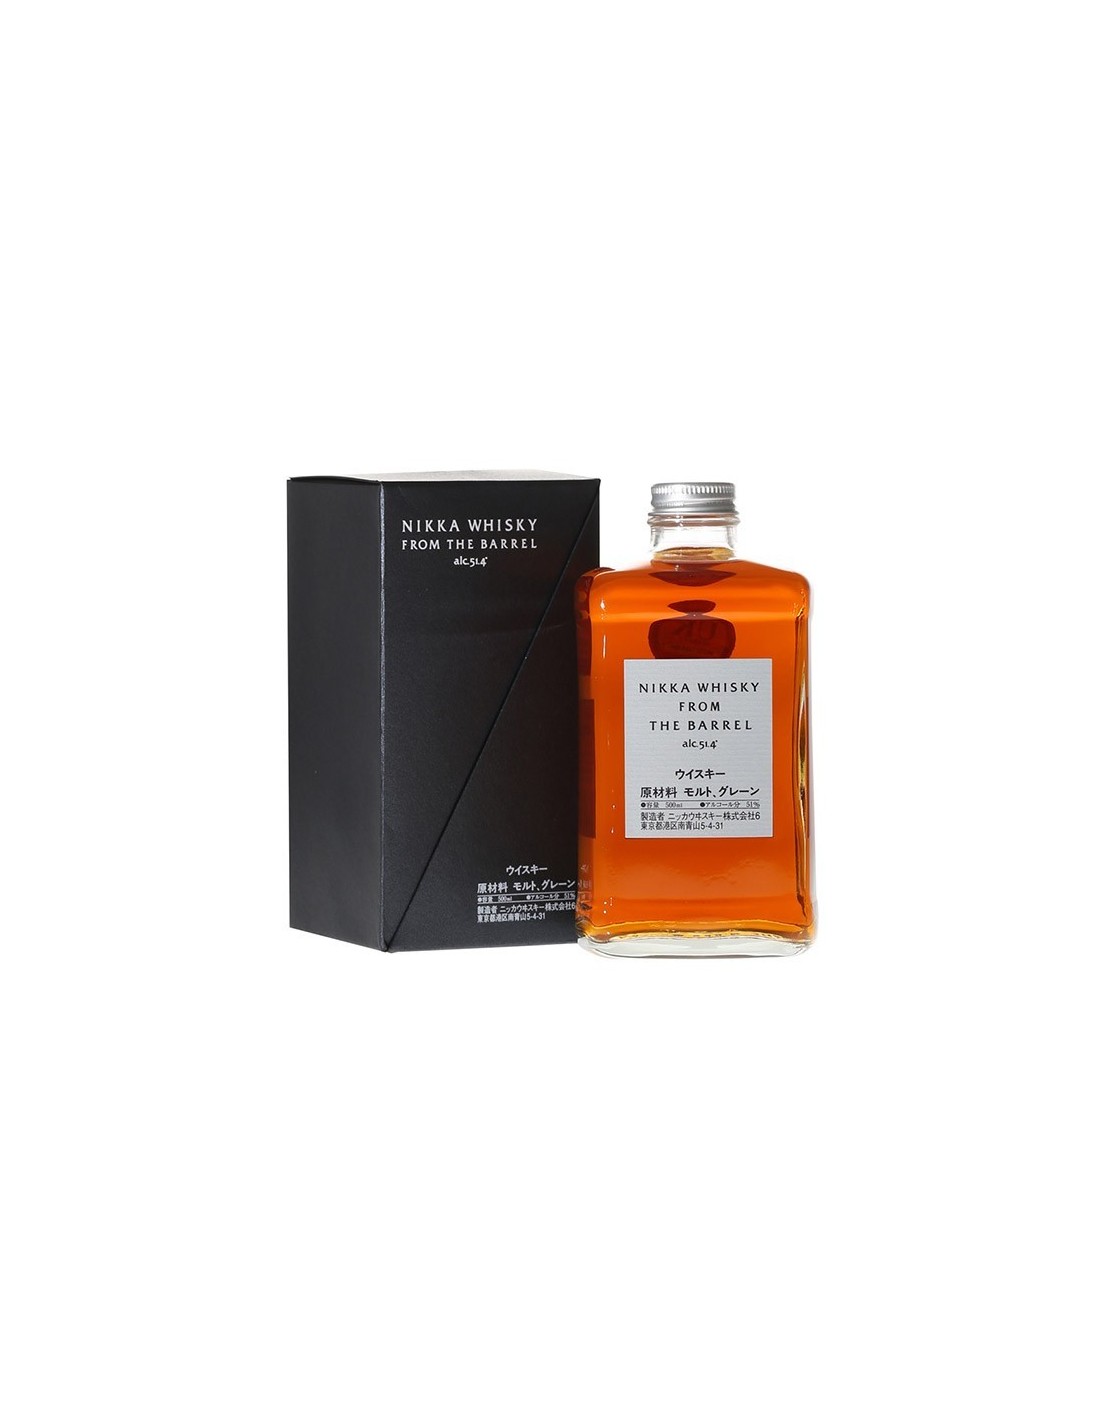 Whisky Nikka From The Barrel, 0.5L, 51.4% alc., Japonia alcooldiscount.ro